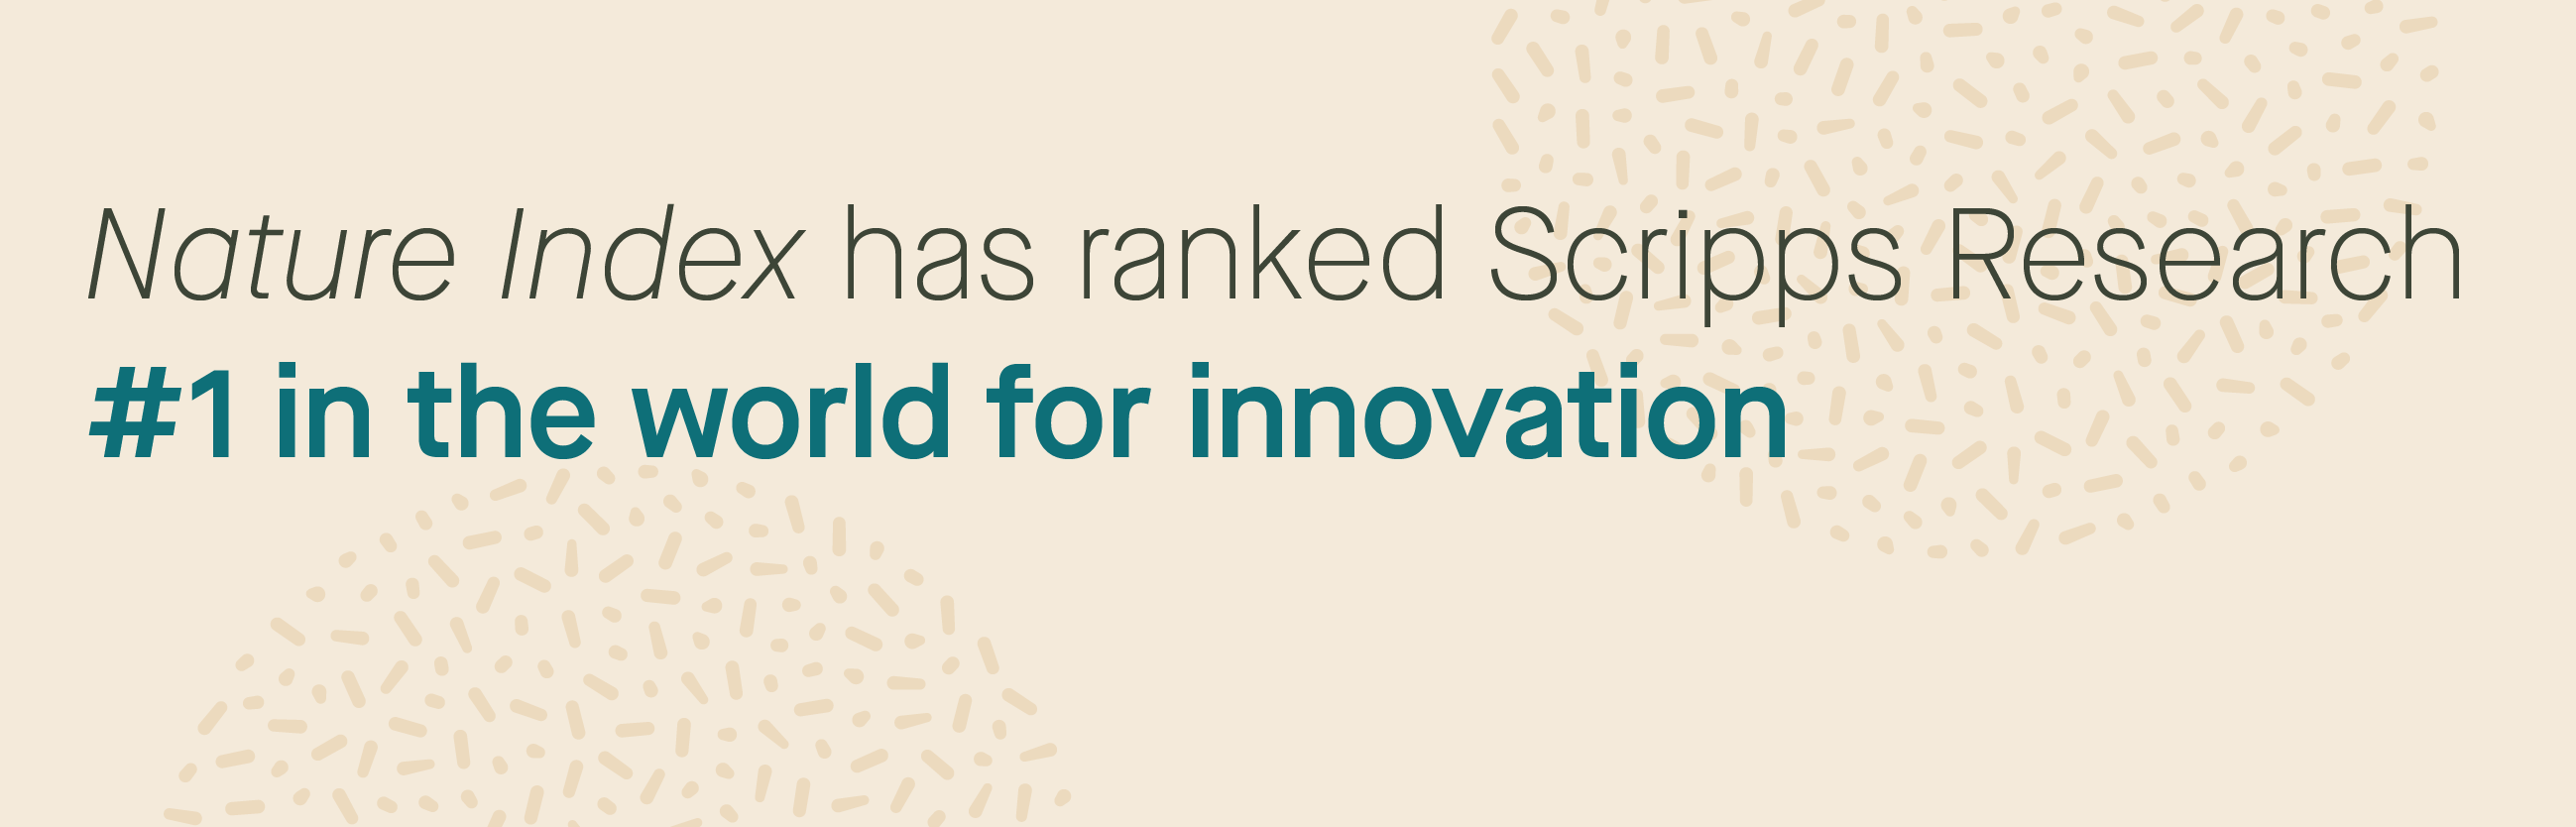 Nature Index has ranked Scripps Research #1 in the world for innovation